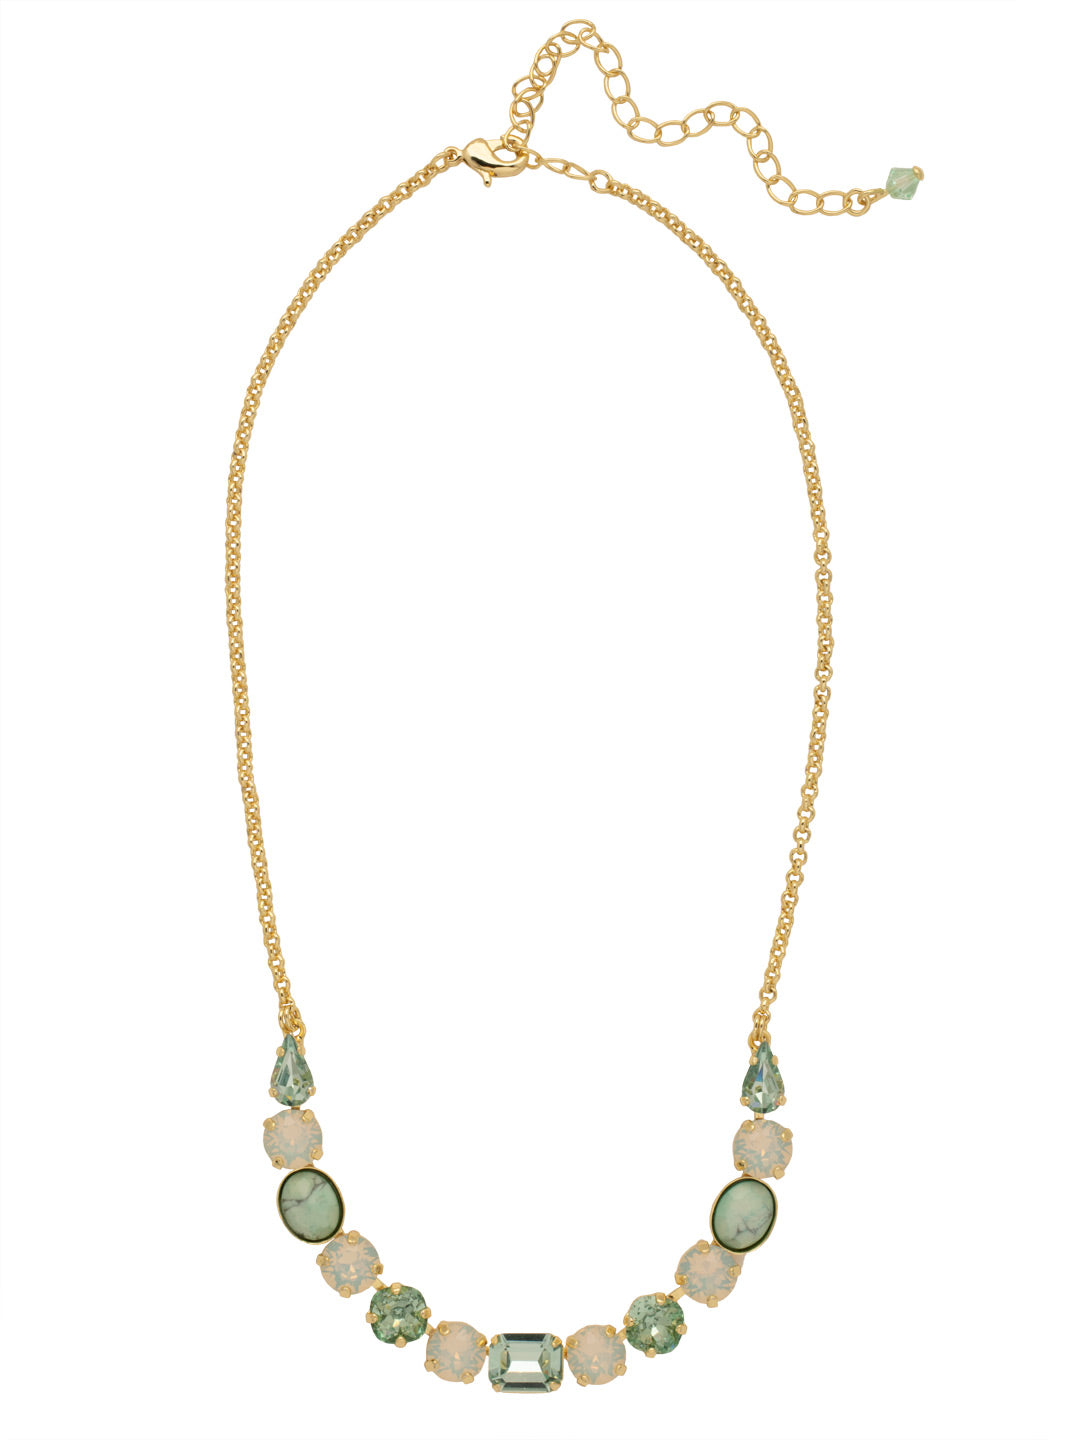 Tansy Half Line Tennis Necklace - NDQ14BGSGR - <p>Oval, round, emerald, pear and cushion cut crystals are accented by a delicate chain for subtle sparkle that looks great layered or worn solo. From Sorrelli's Sage Green collection in our Bright Gold-tone finish.</p>